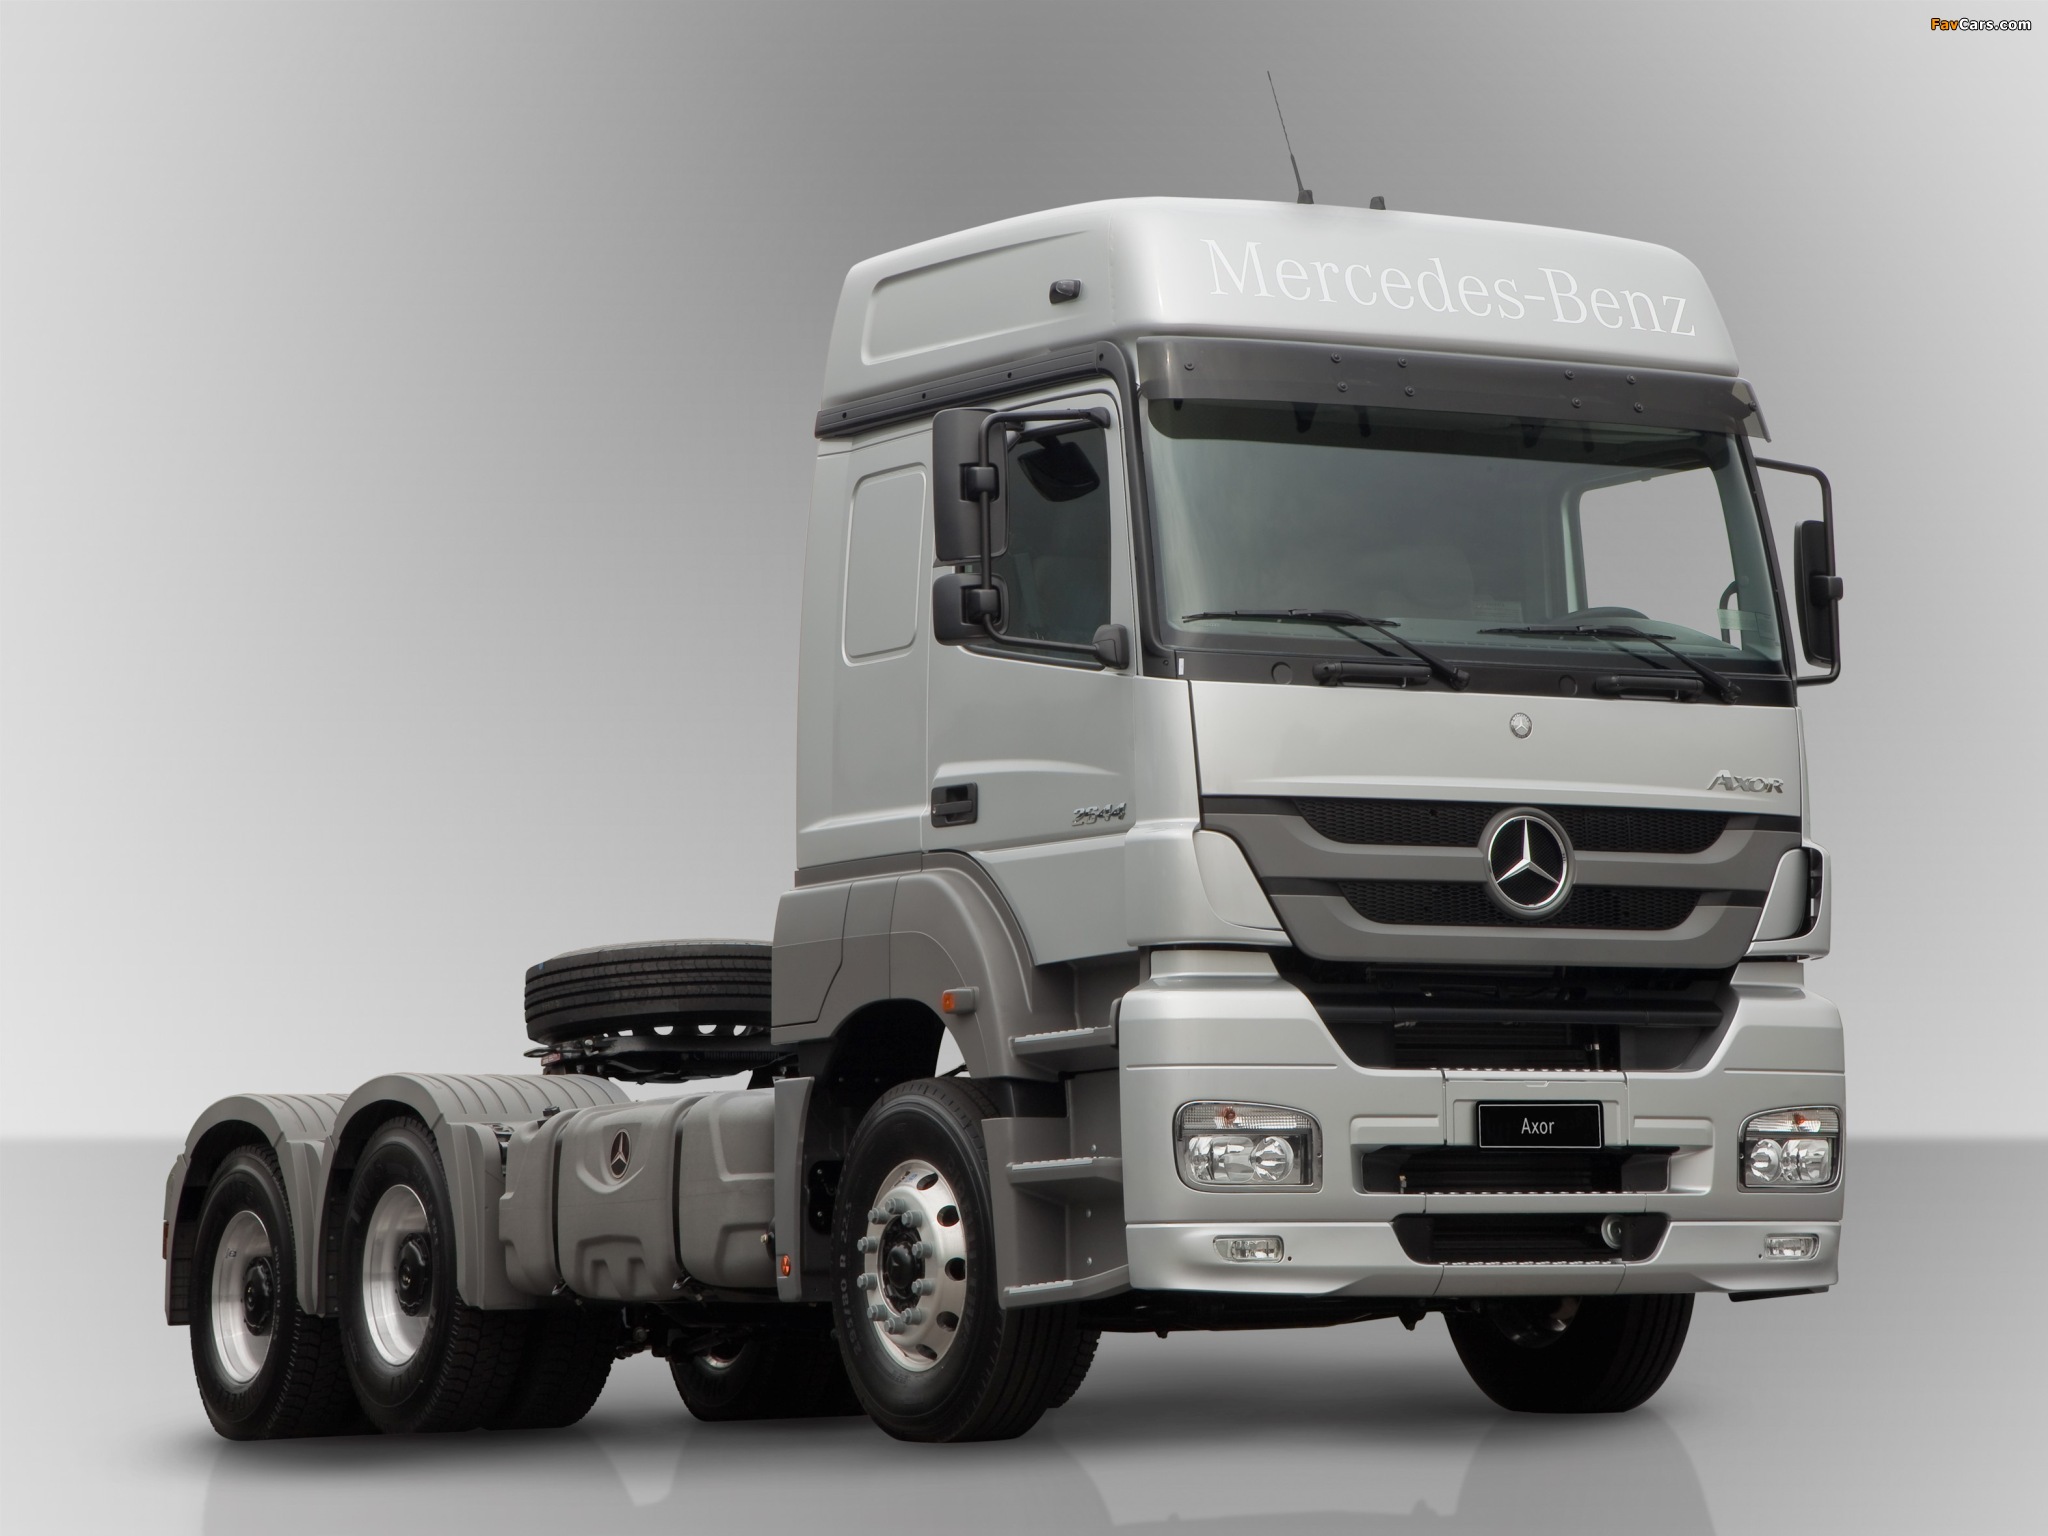 High Quality Tuning Files Mercedes-Benz Axor  2529 286hp